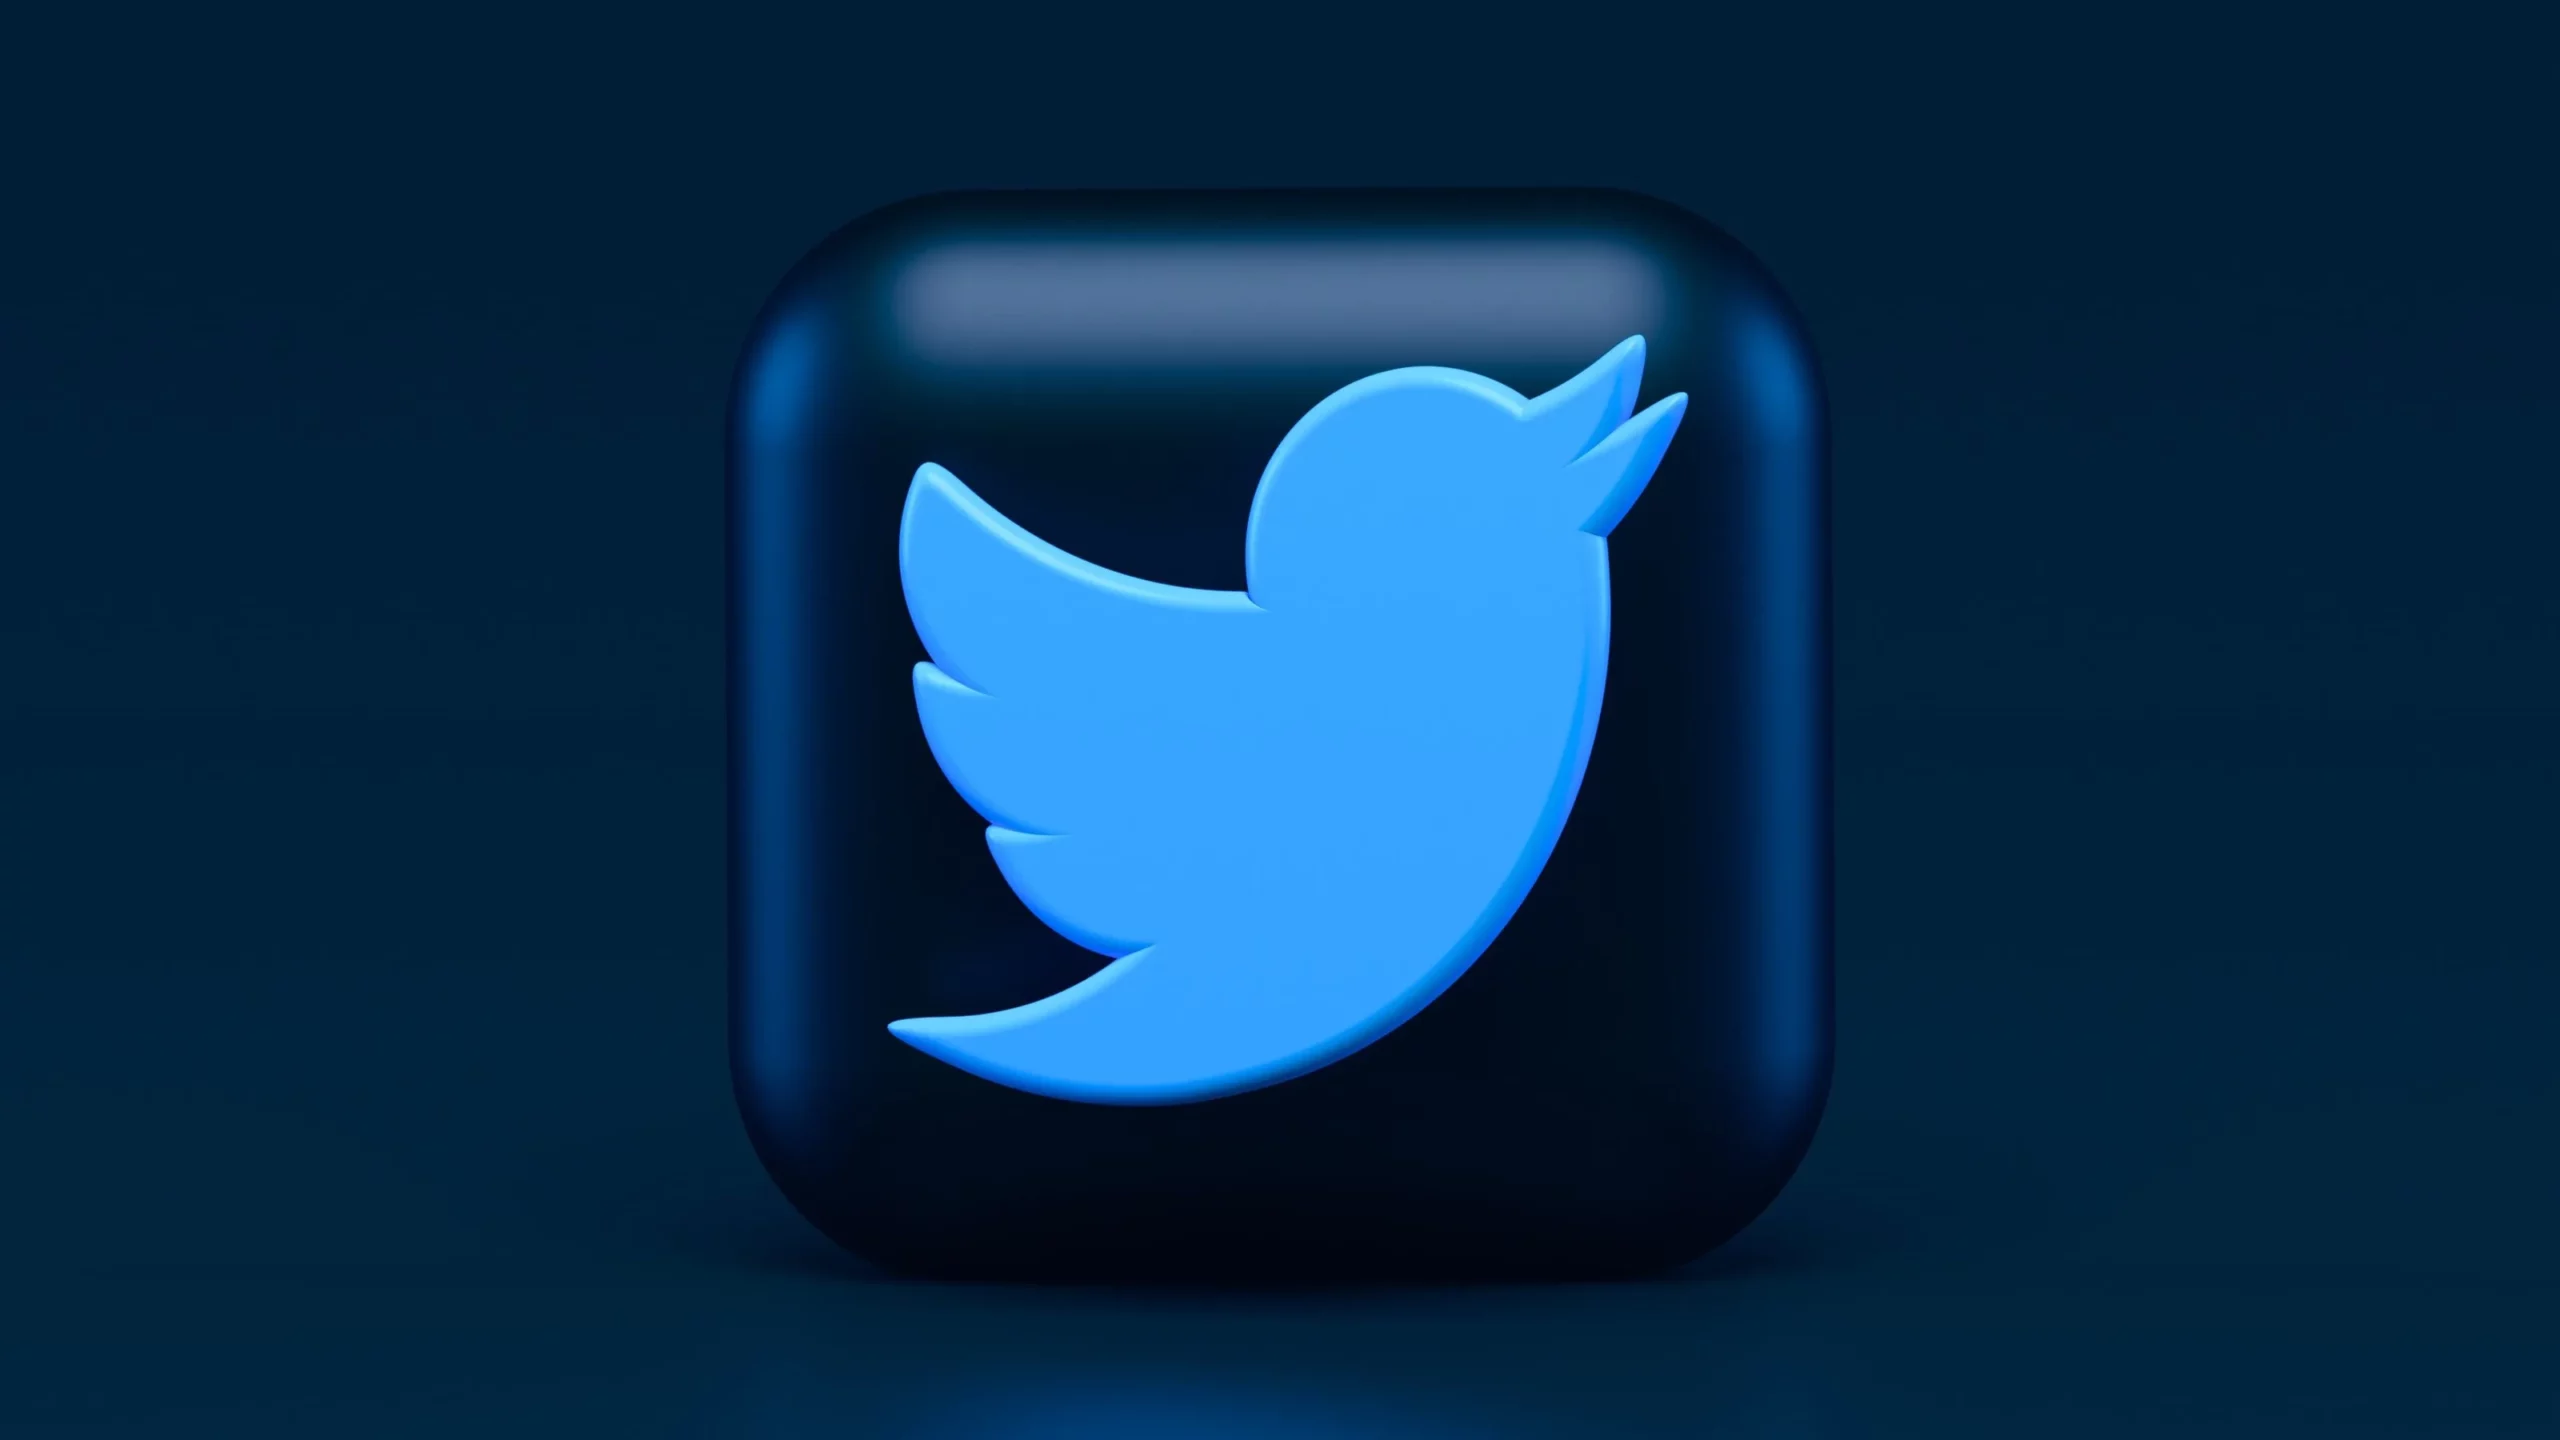 How To Stop Users From Finding You By Your Email Address Or Phone Number On Twitter